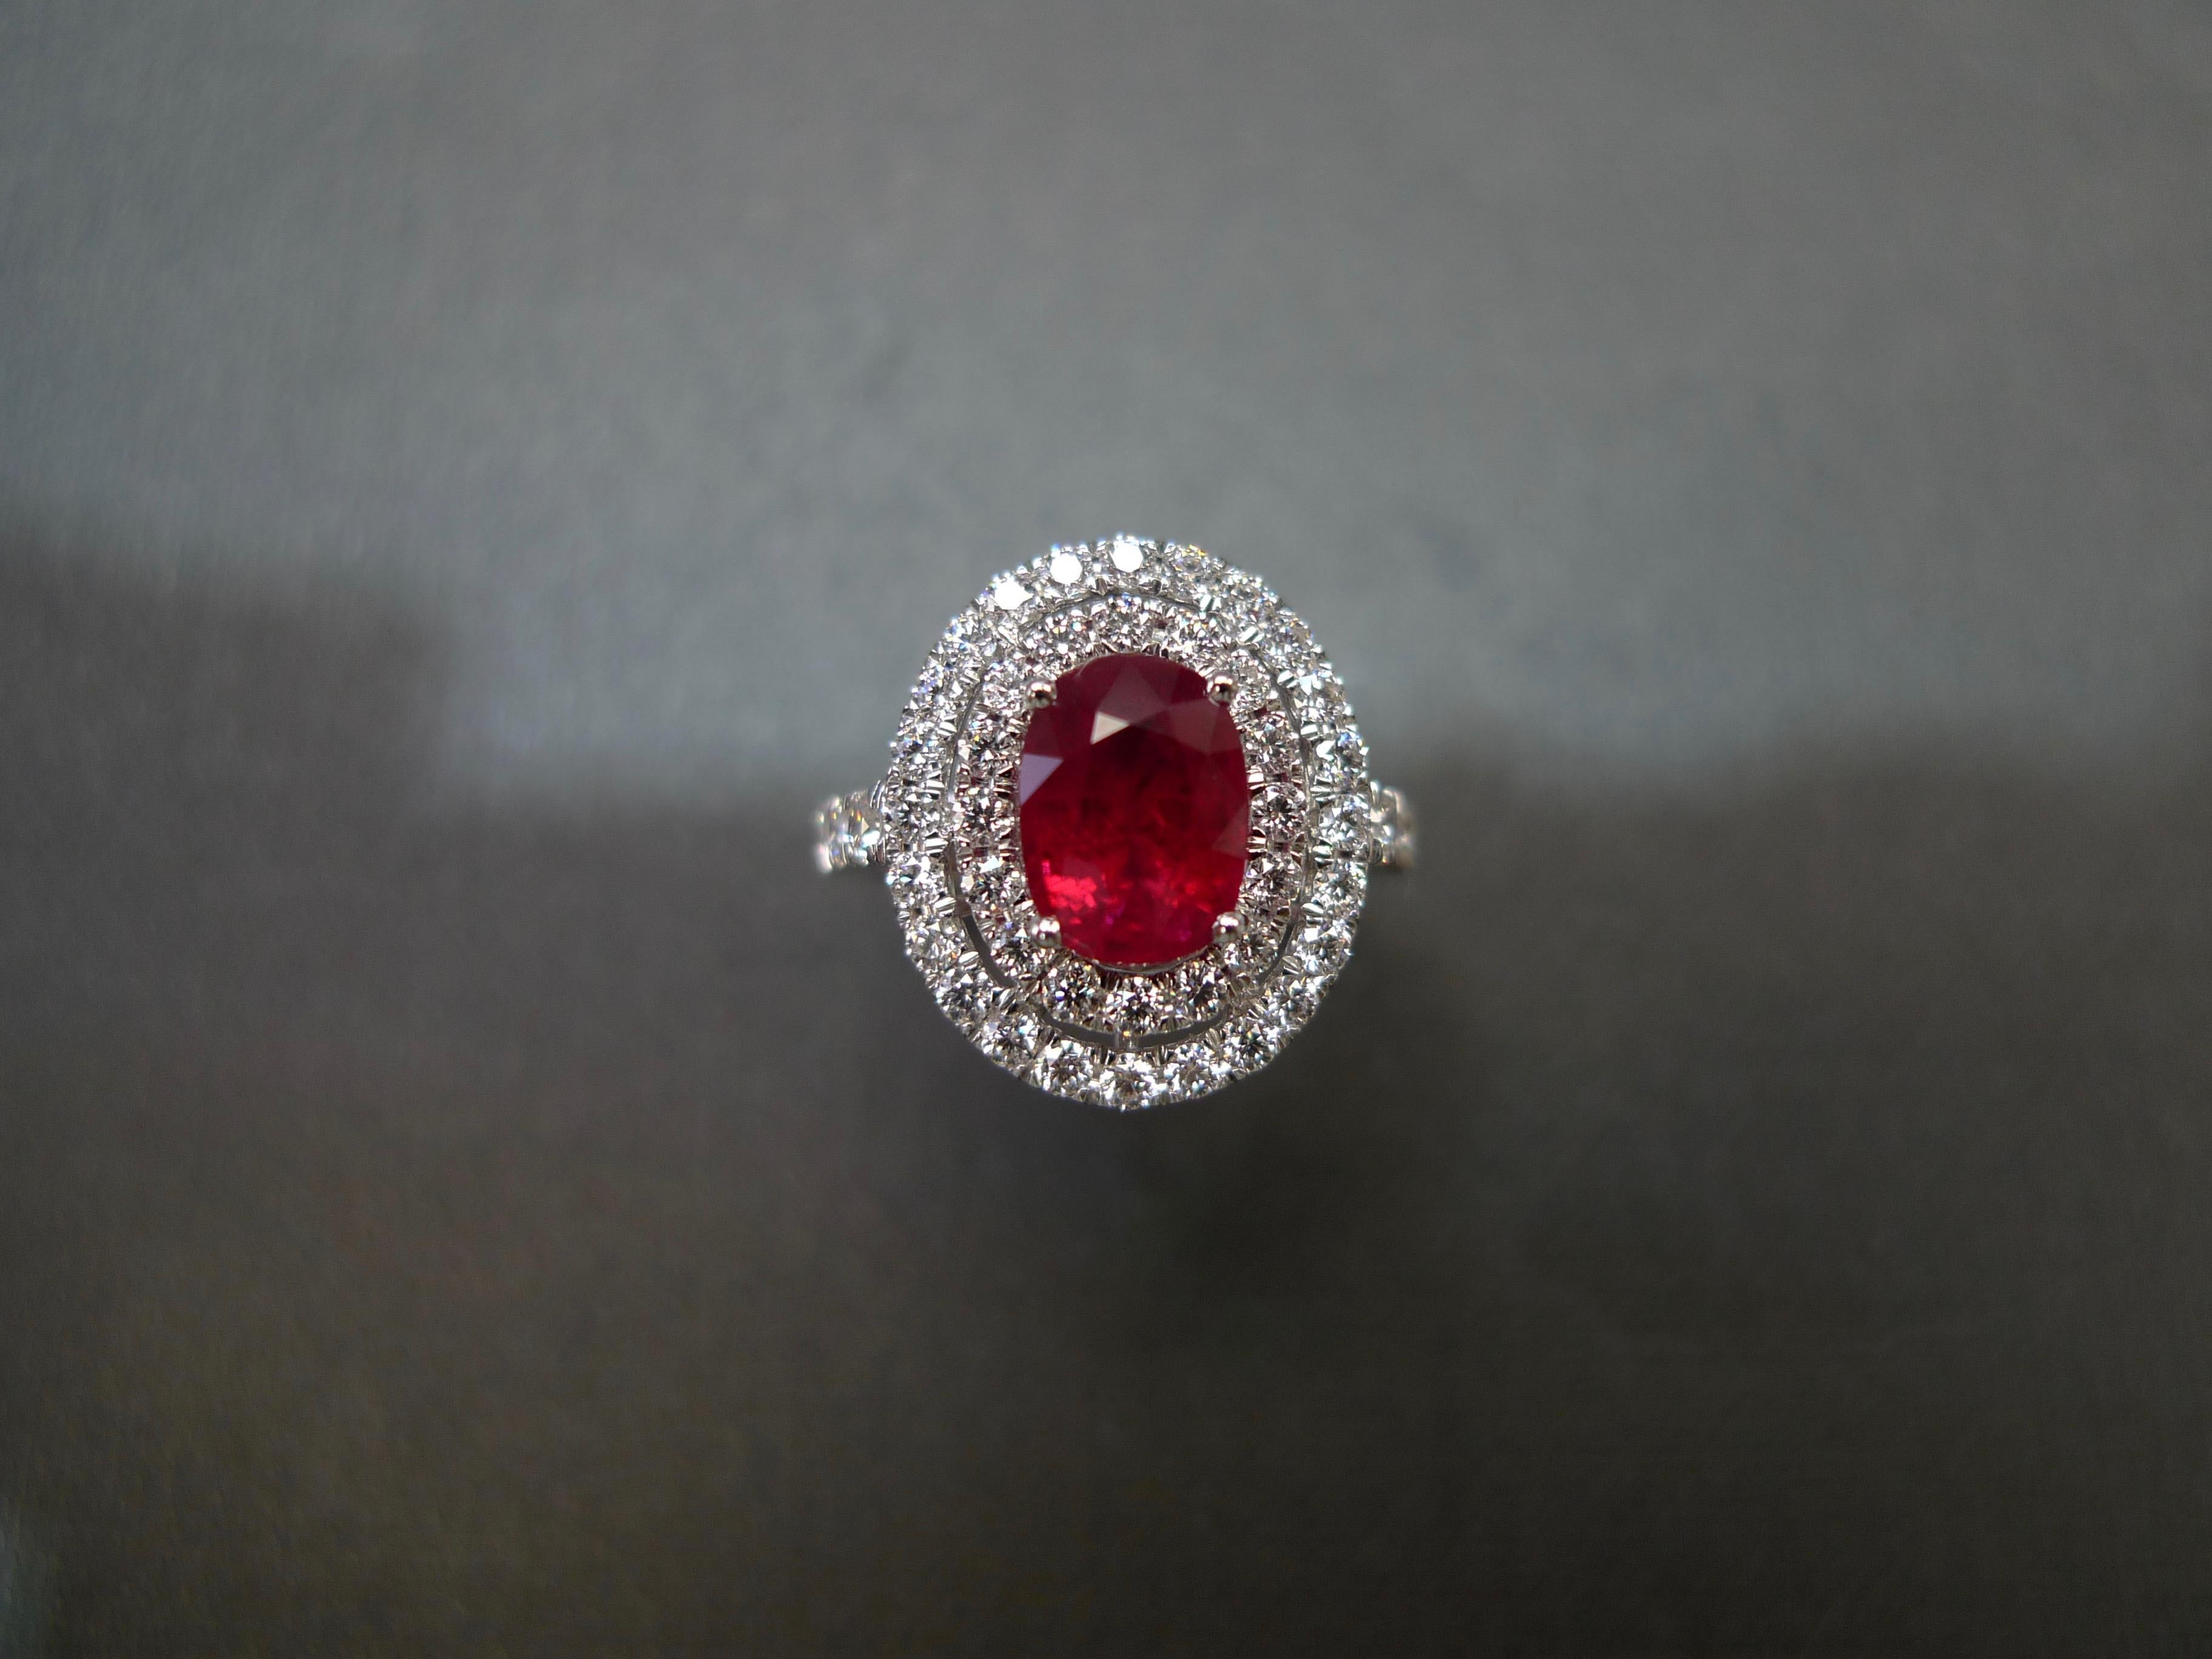 A stunning ruby diamond ring set with a 2.03ct natural ruby at the centre and round brilliant cut diamond on the side. 

Product Specifications:
Center Stone: High quality natural Burma oval shape ruby 
Weight: 2.03ct (8.14 x 5.99 x 4.55 mm) 
Color: